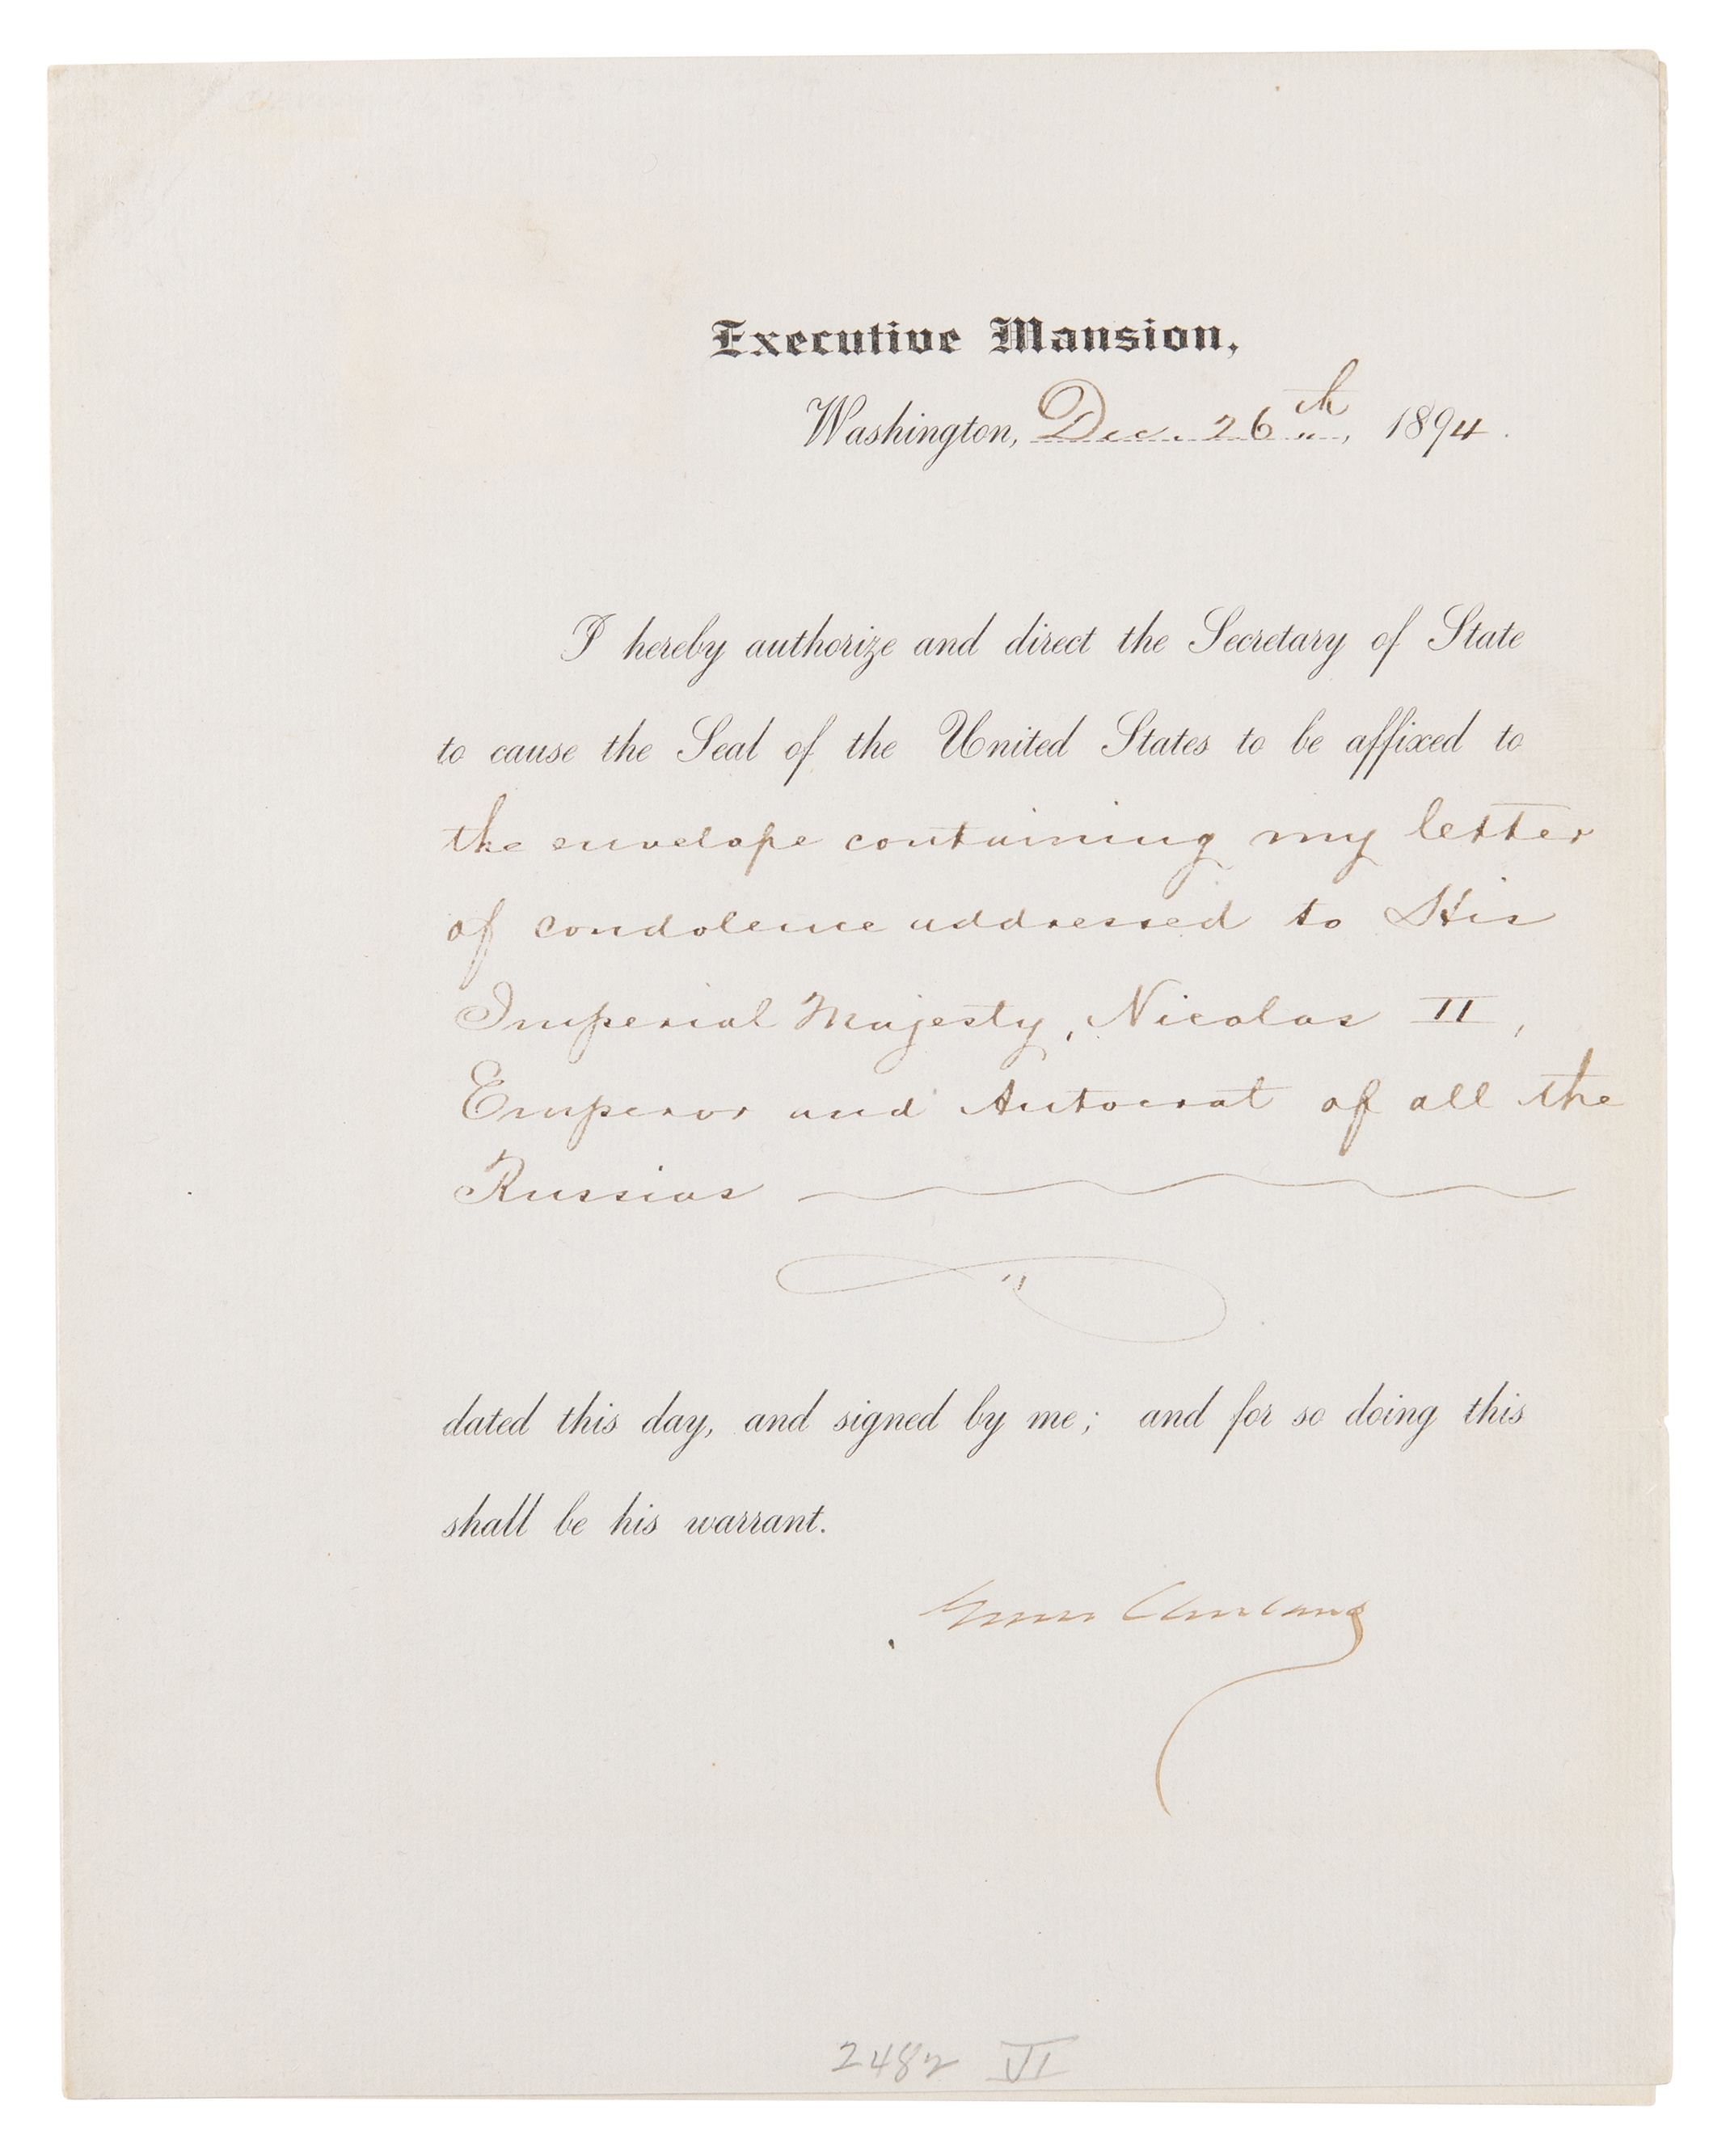 Lot #72 Grover Cleveland Document Signed as President, Sending Condolences on the Death of Czar Alexander III - Image 1